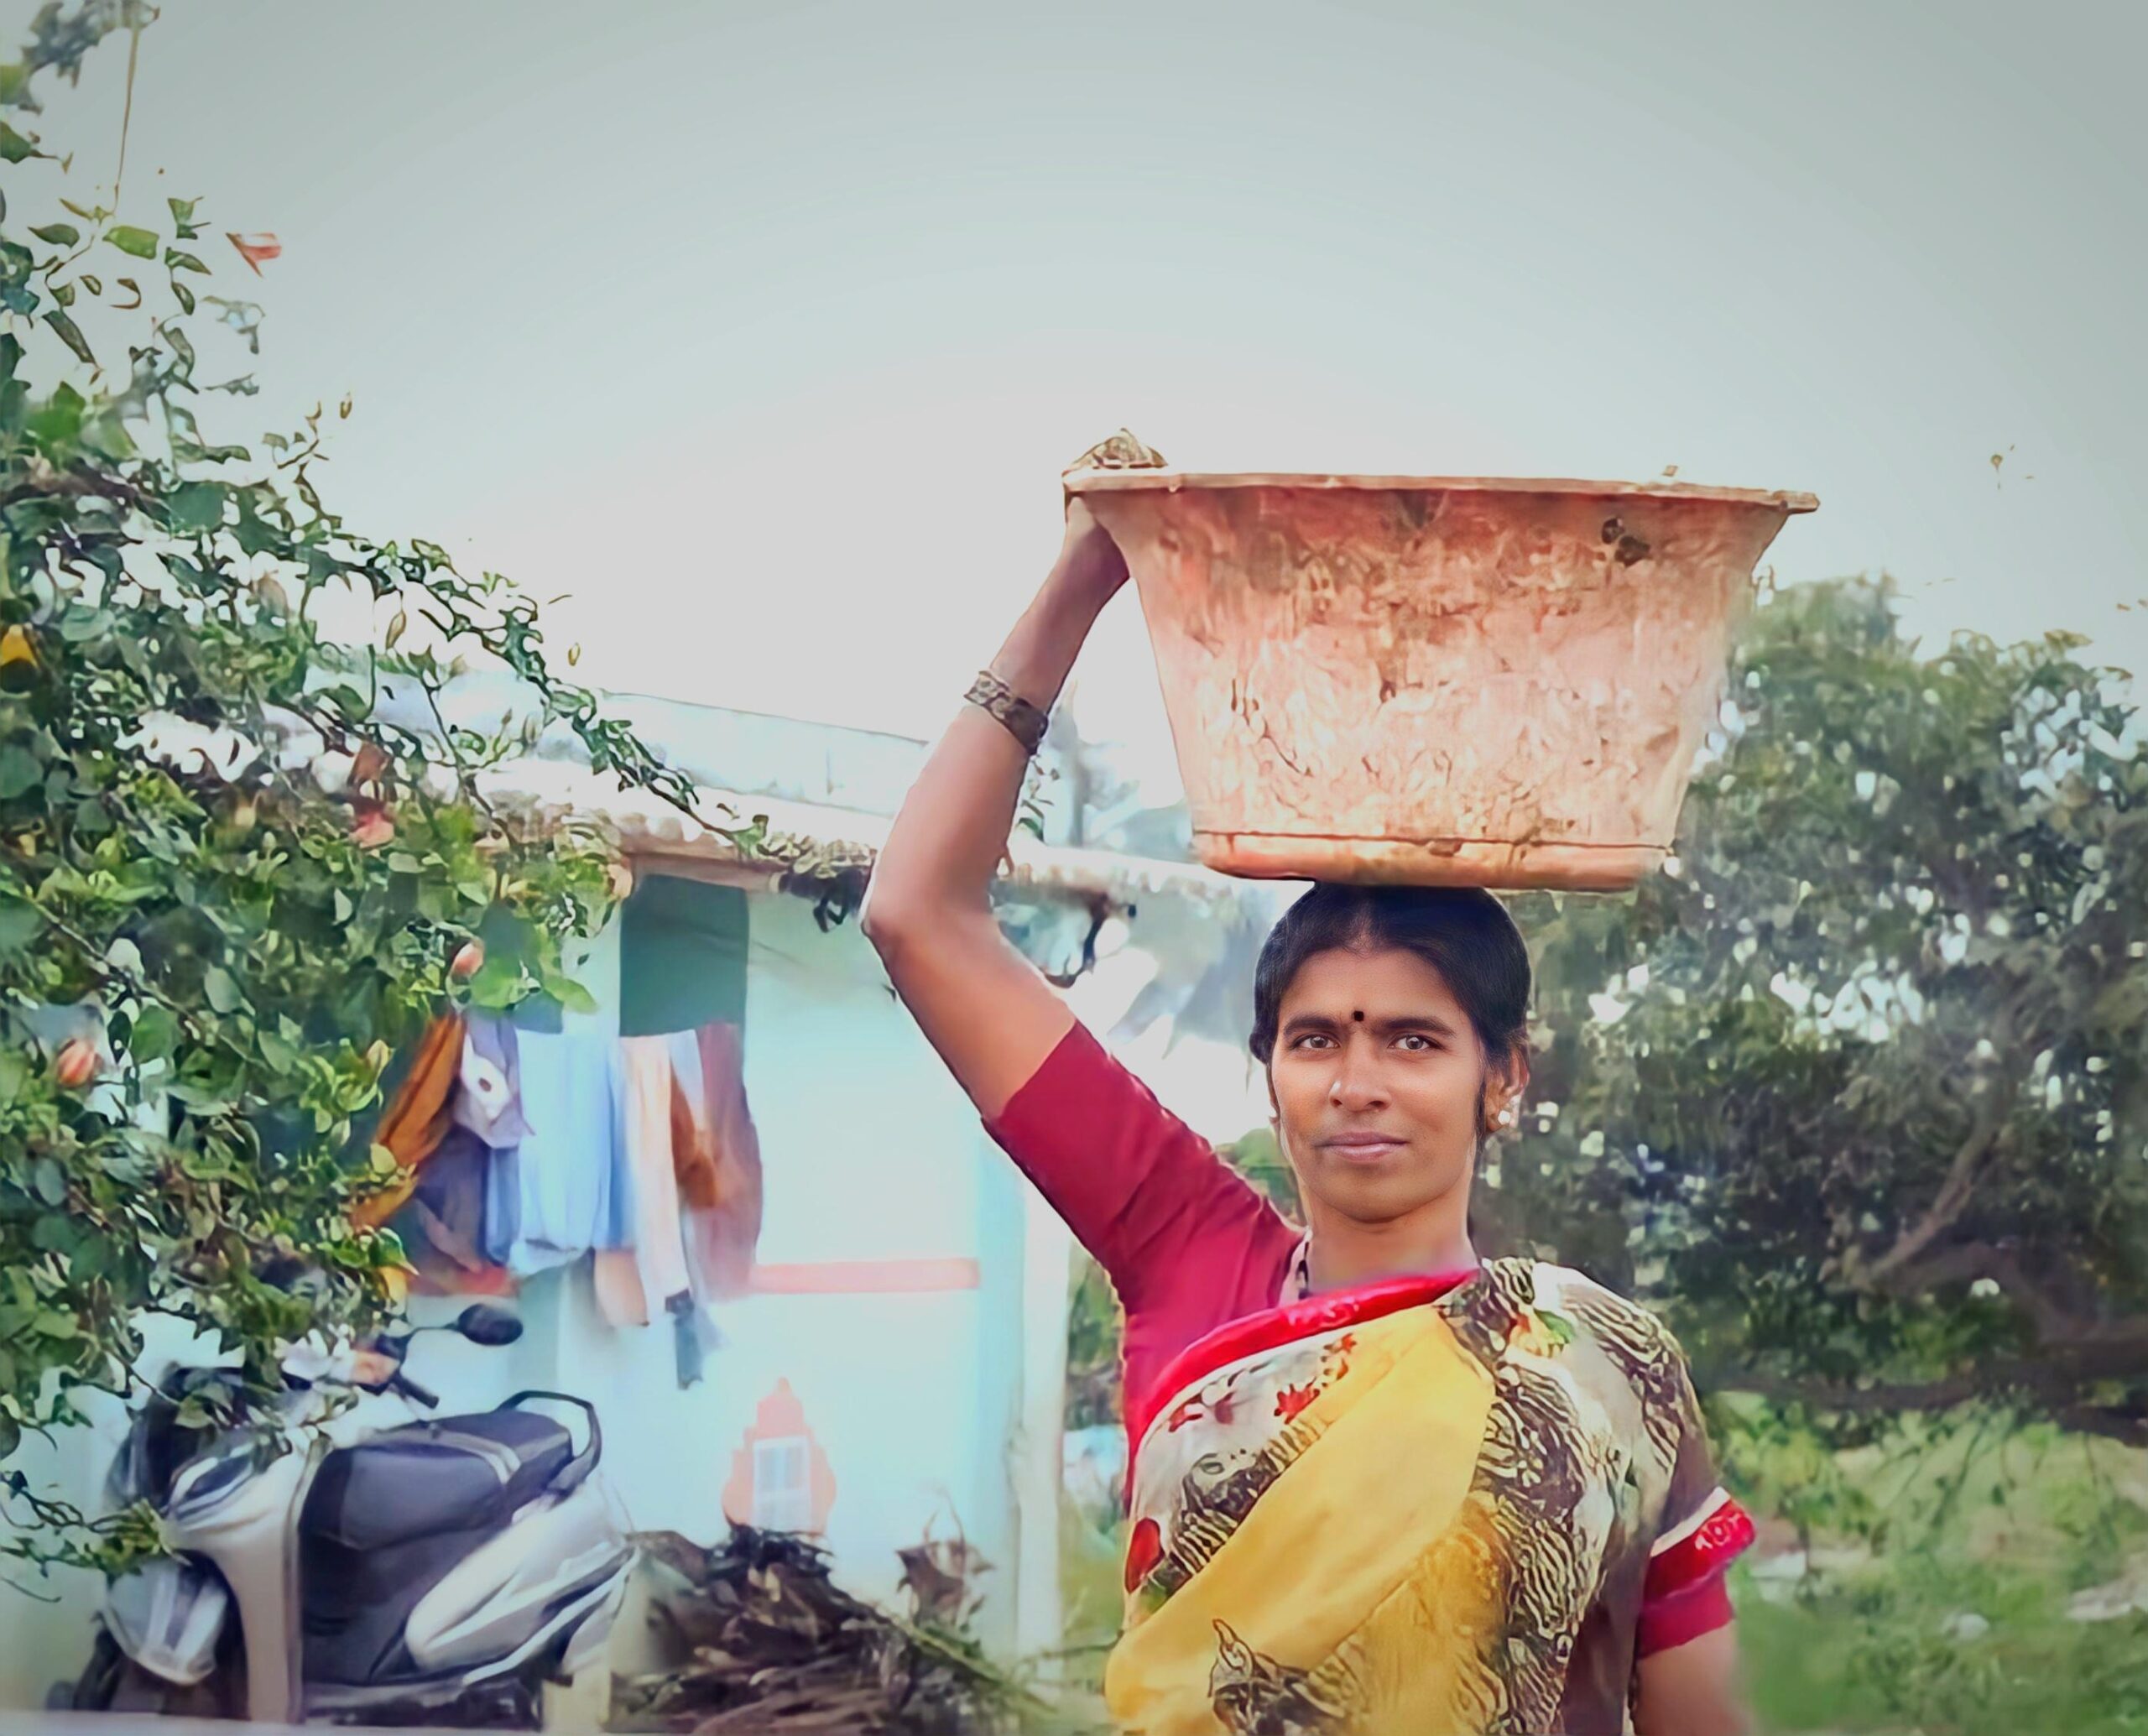 a female dairy farmer is holding a pot in the rural district of Kolar in Karnataka, India